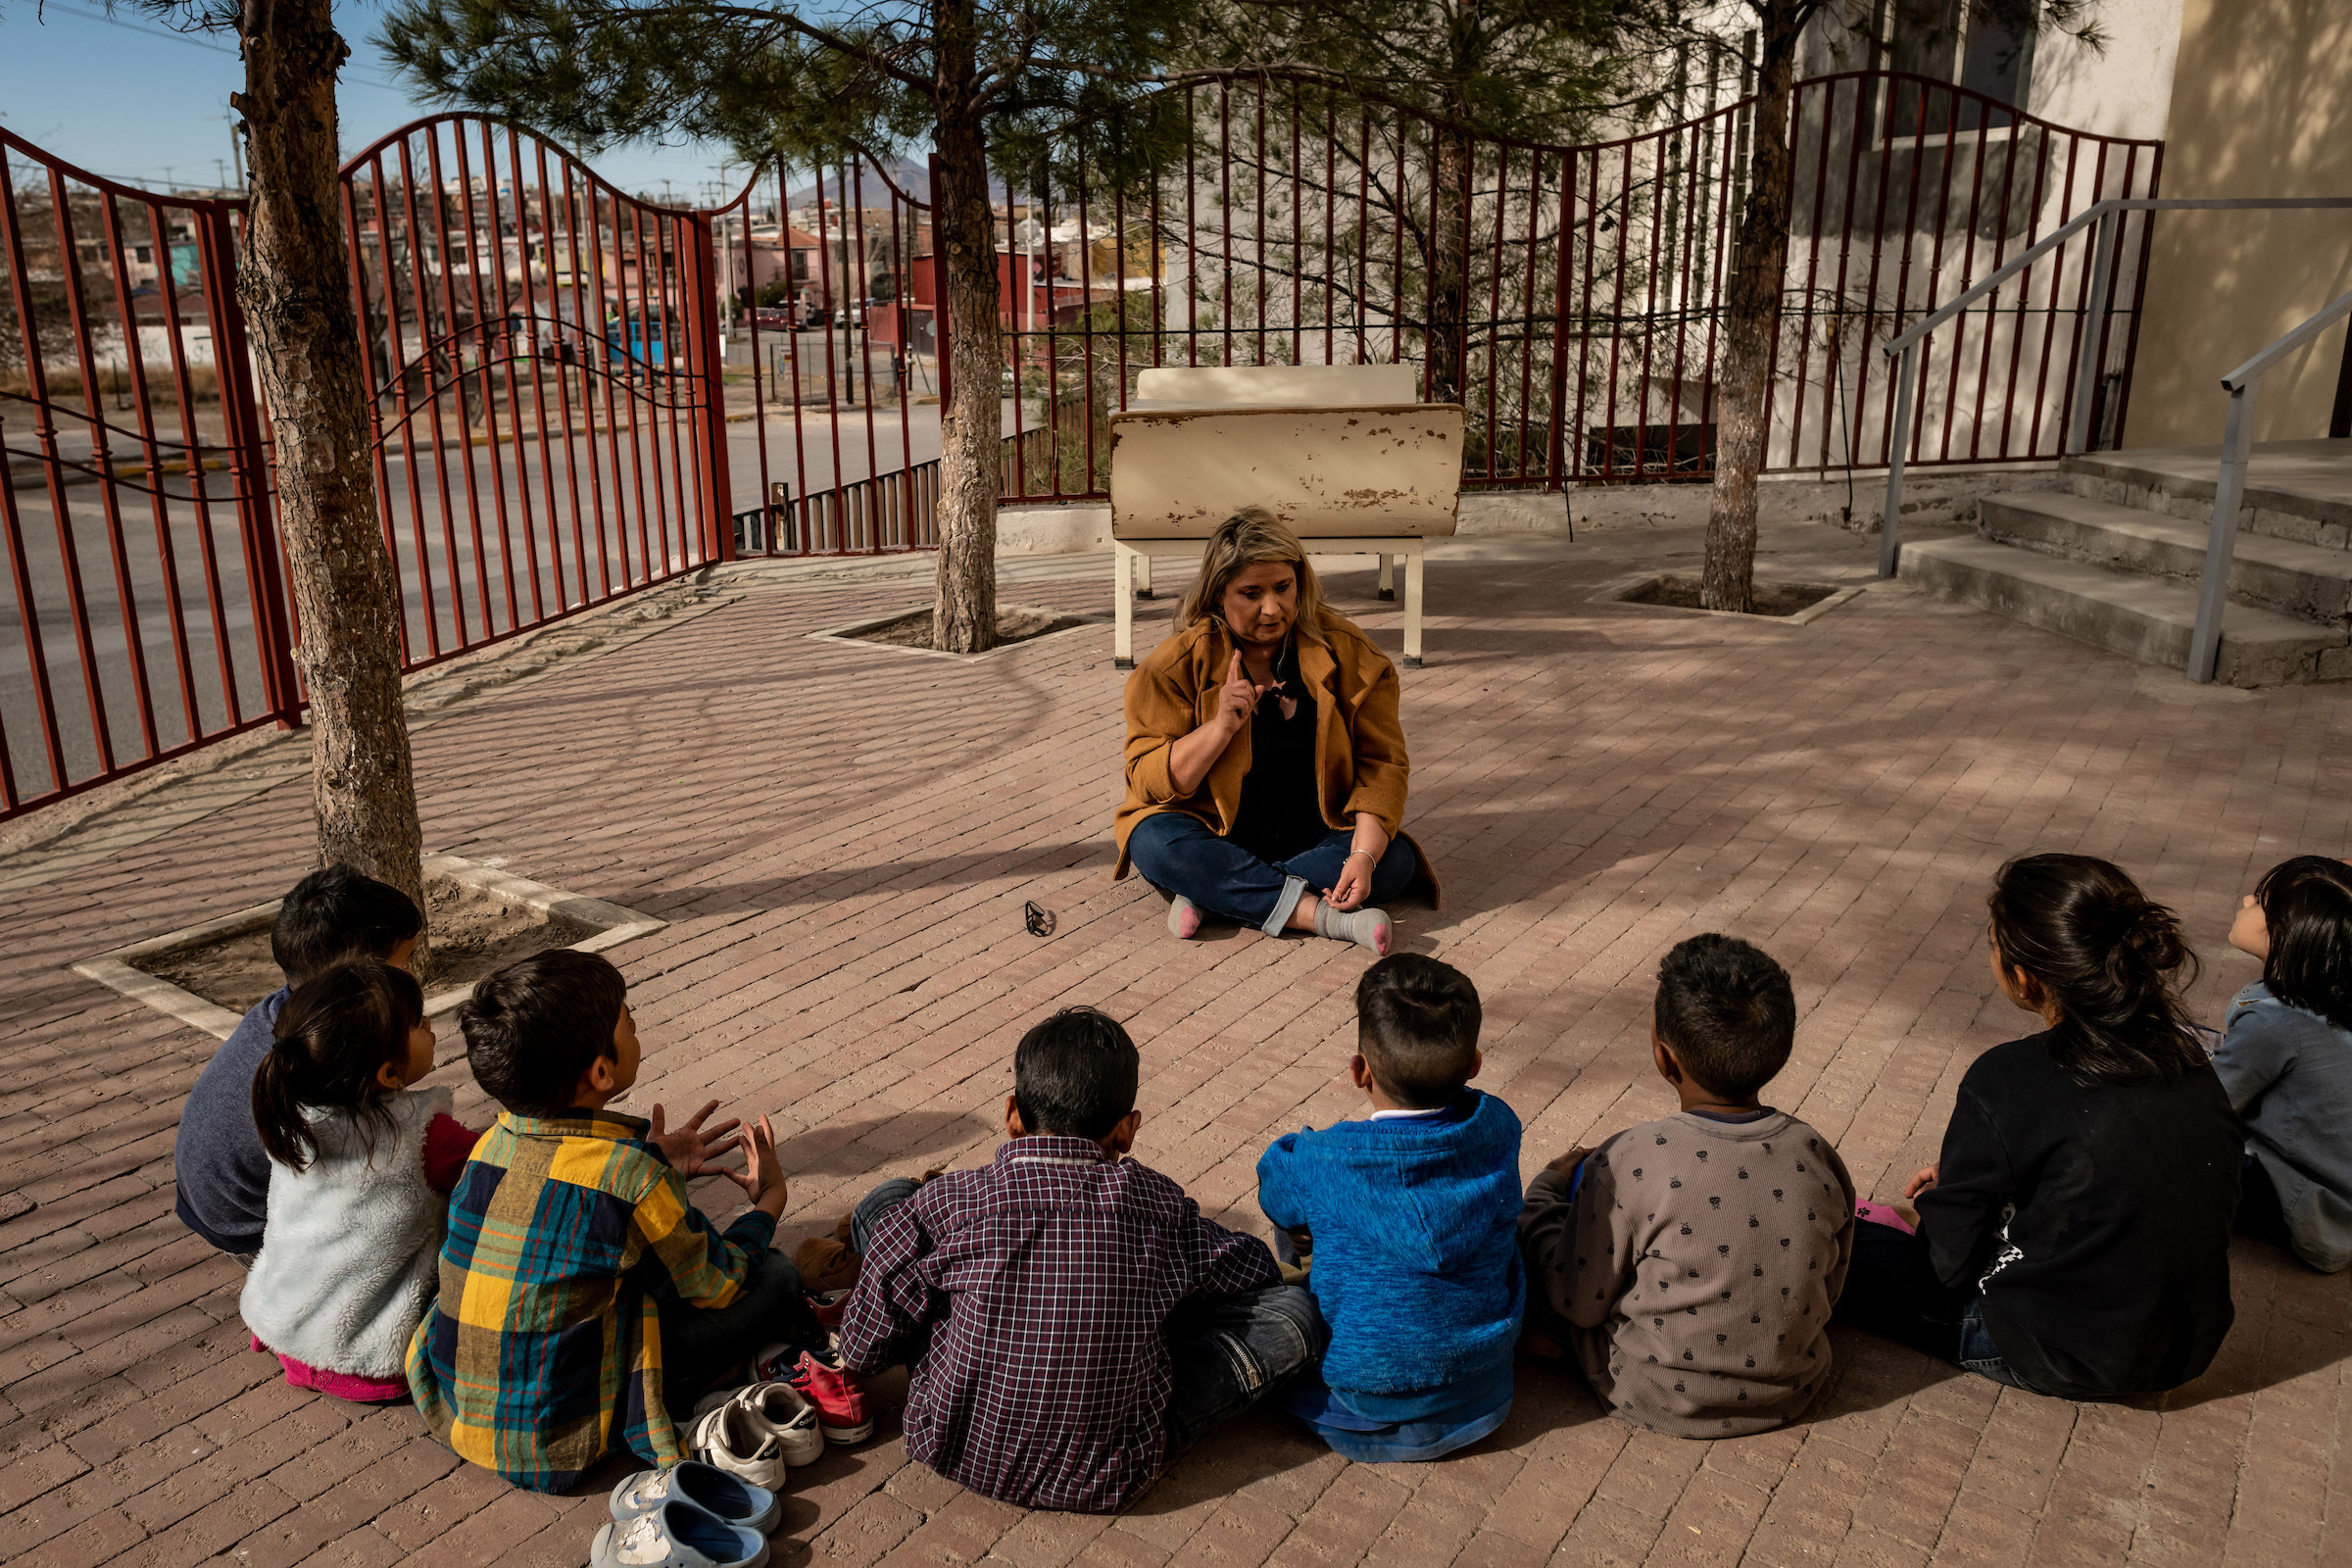 Psychologist Patricia Galarza leads a group therapy session about how to say goodbye to your friends with the children living at the San Juan Apóstol migrant shelter. The children will soon be separated from each other as the government starts processing asylum seekers under MPP into the U.S. (Meridith Kohut for TIME)